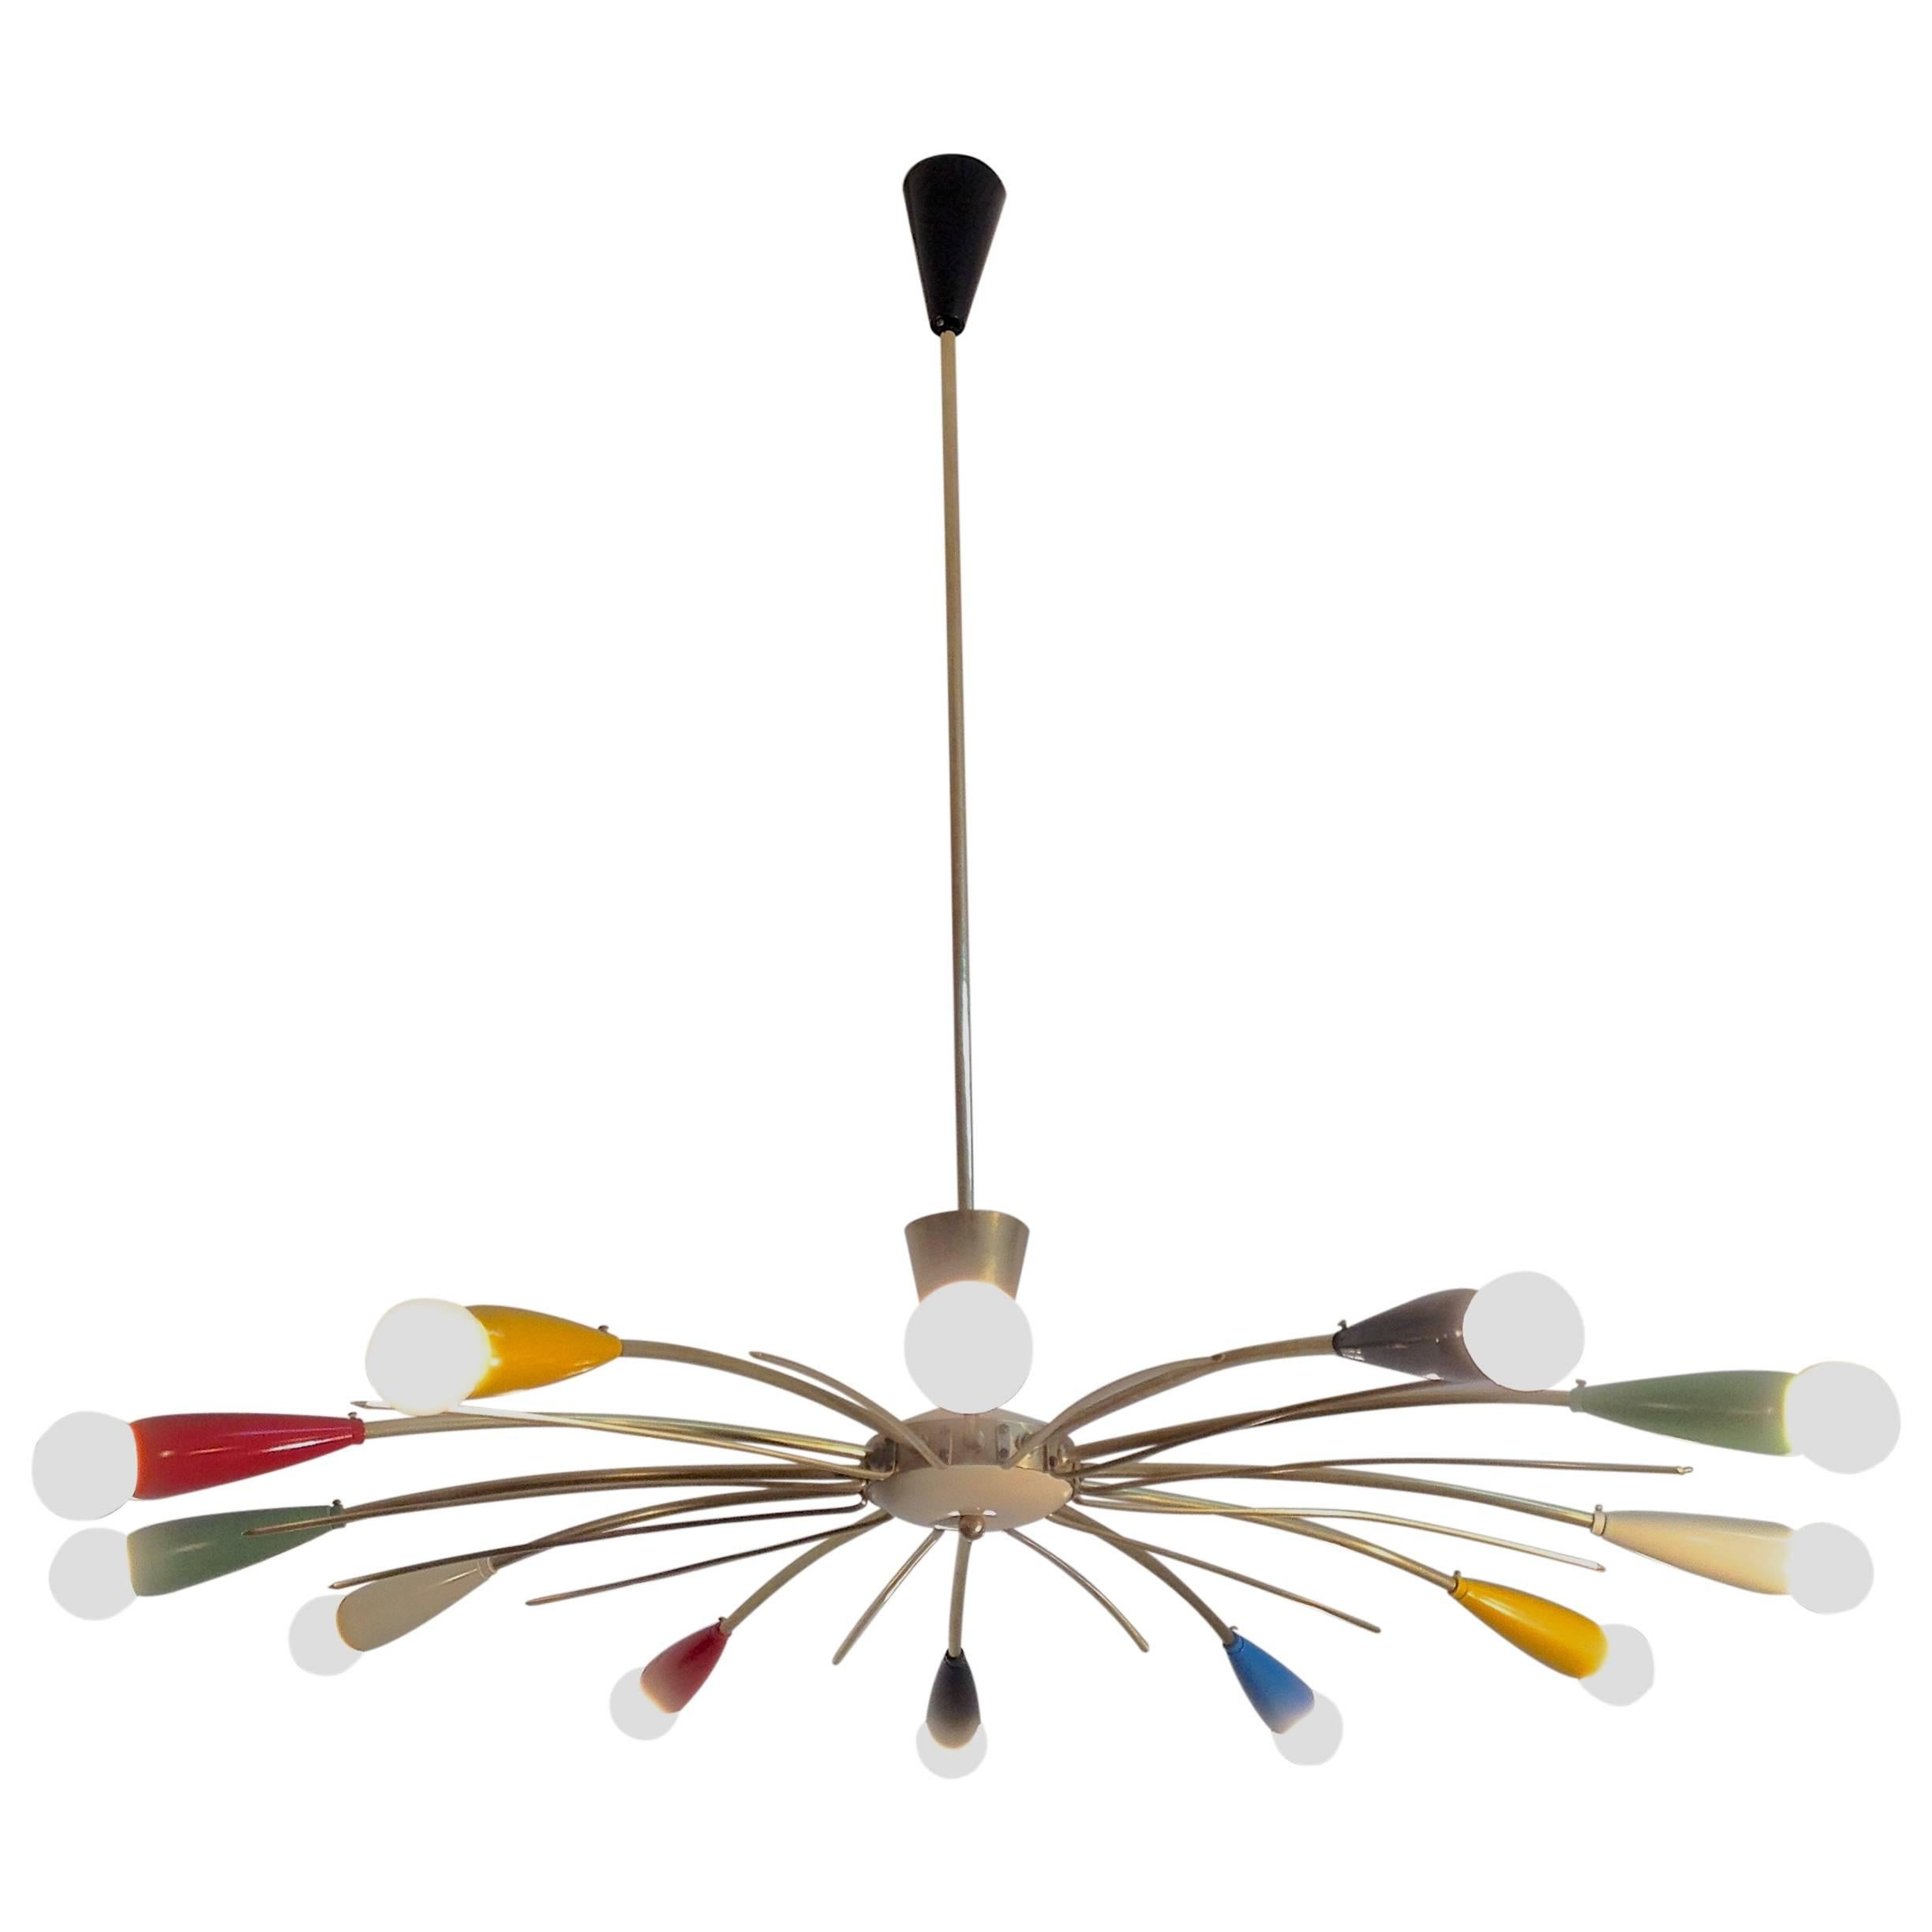 High quality Italian manufactured Sputnik / sunburst chandelier with multicolored cones and brass body. Nice details.